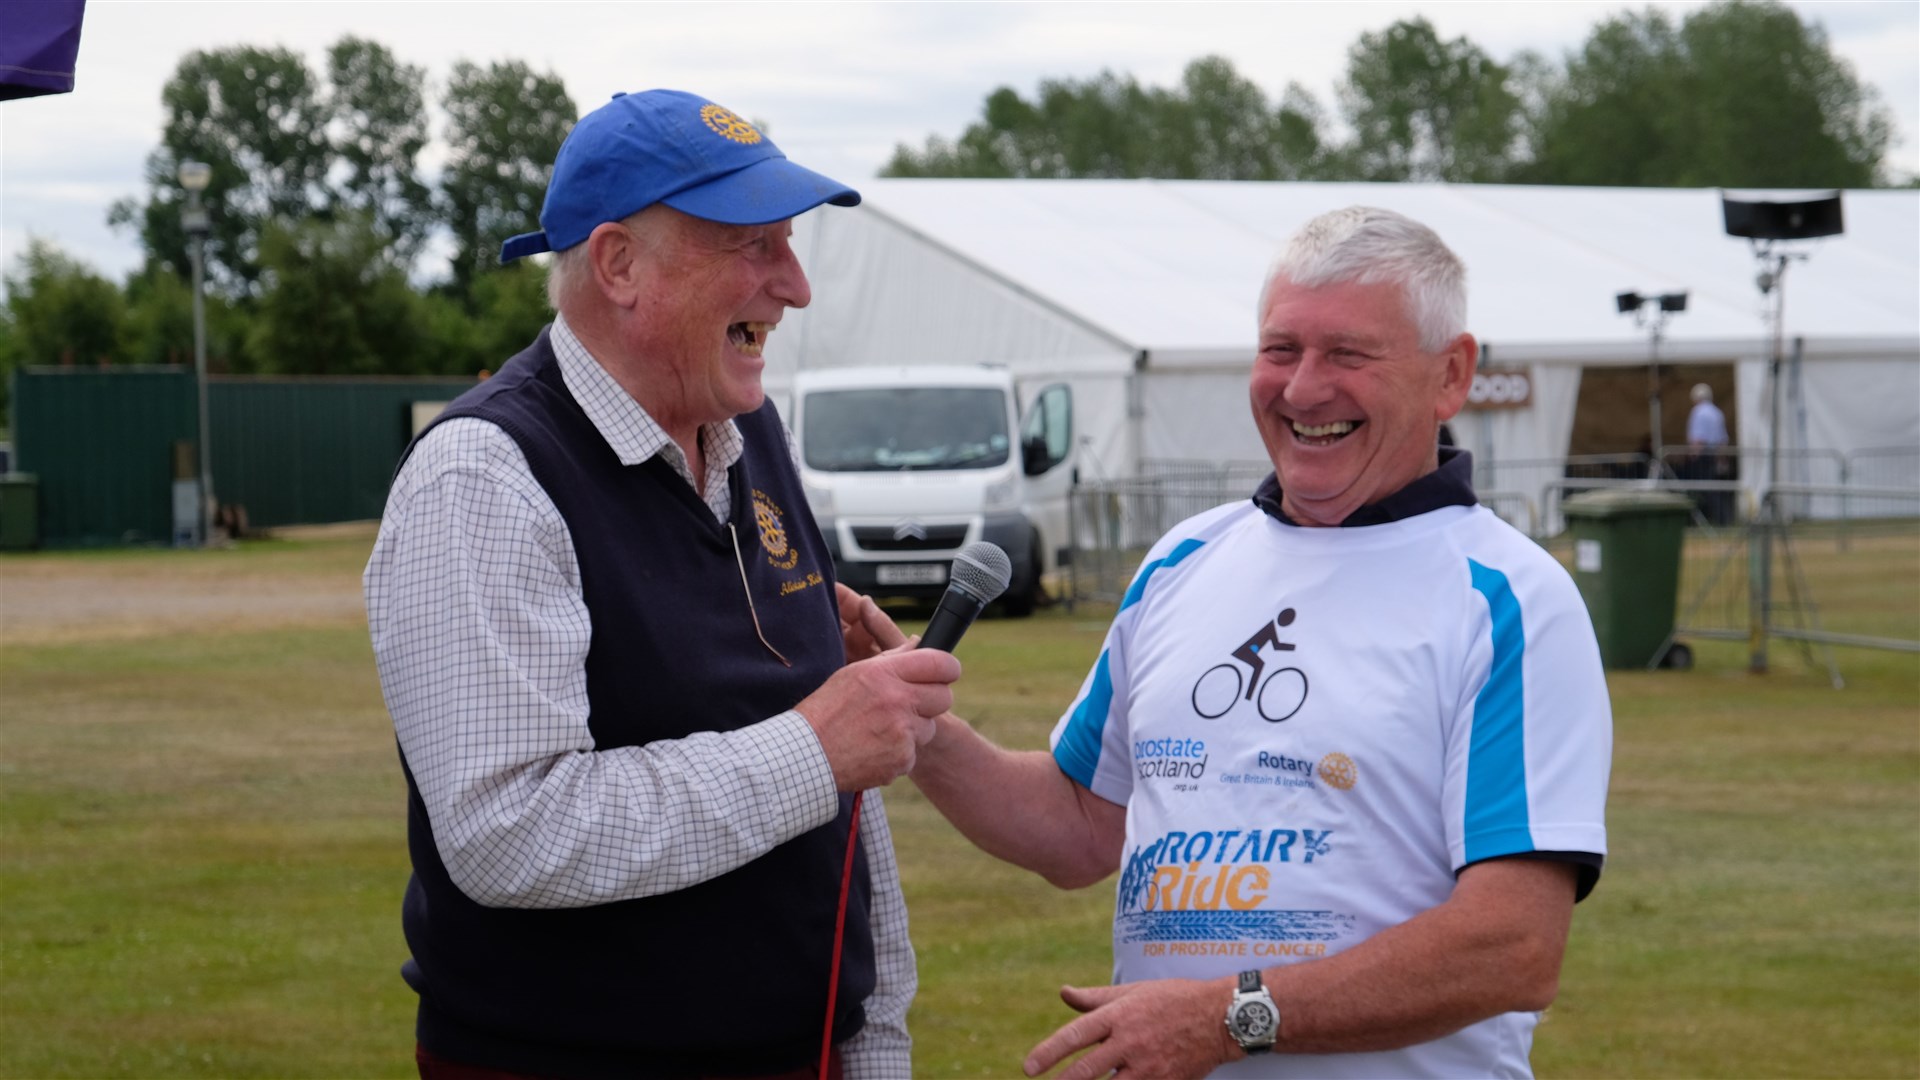 Alistair Sutherland from neighbouring East Sutherland Rotary (he was our compere last year) and Will Porter Past President of Tain & Easter Ross Rotary sharing a laugh